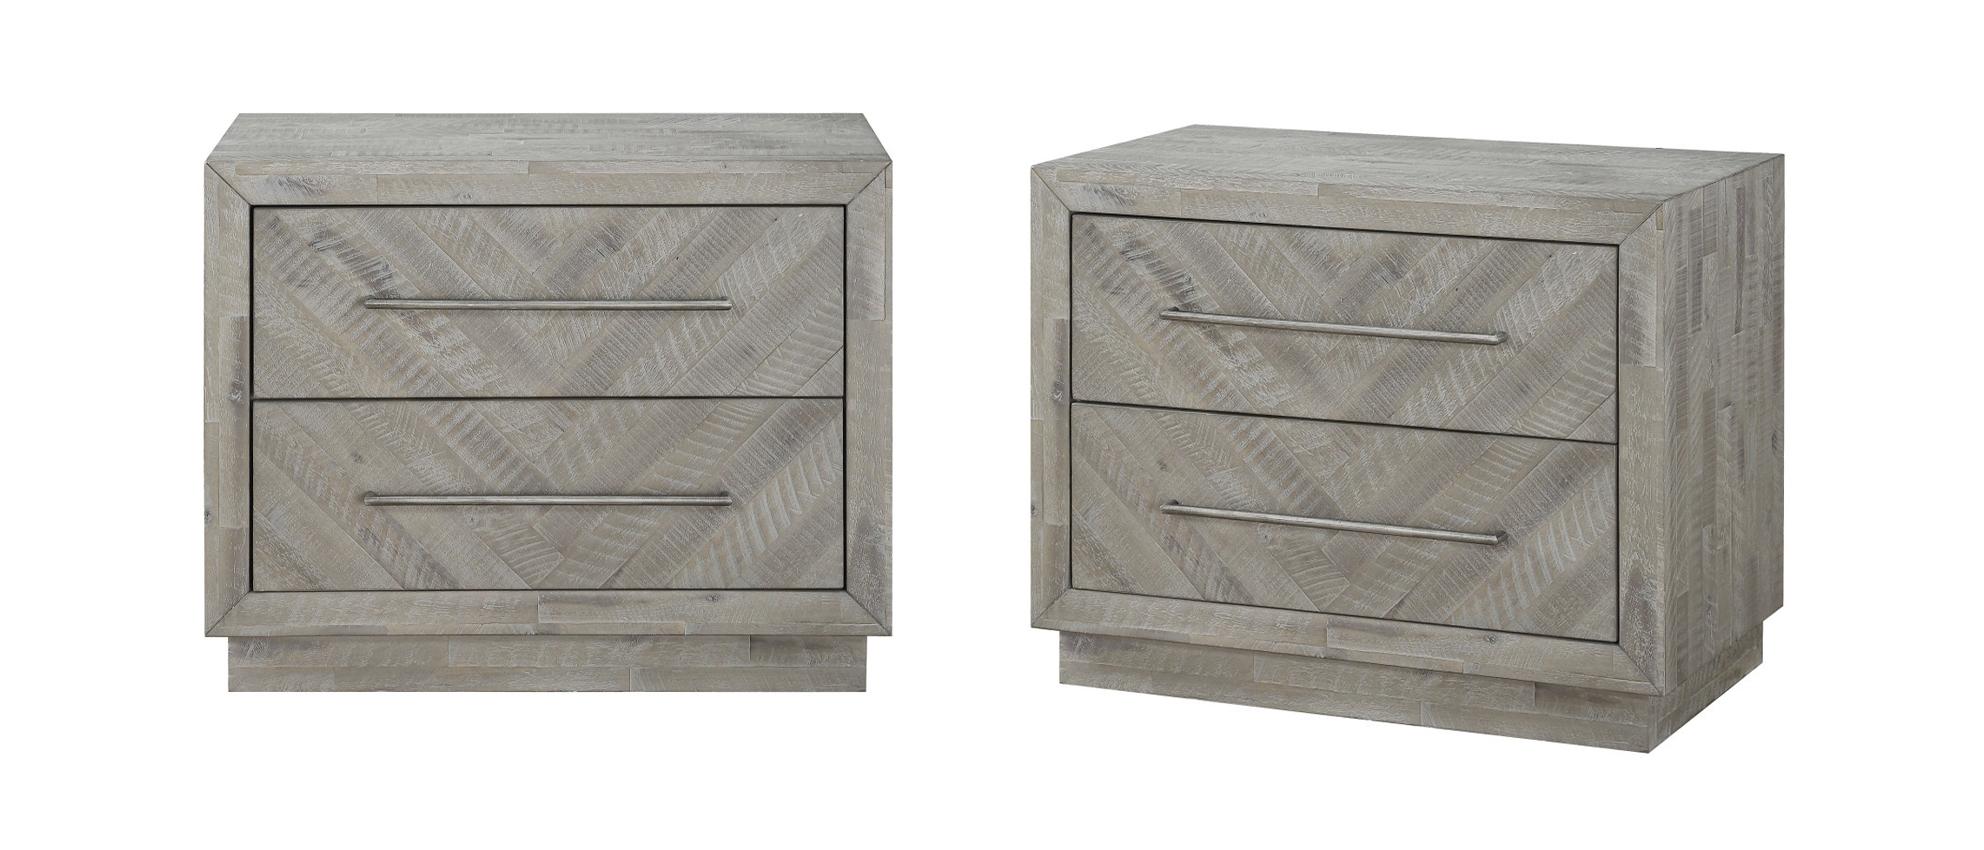 Contemporary, Rustic Nightstand Set ALEXANDRA 5RS381-2PC in Latte 